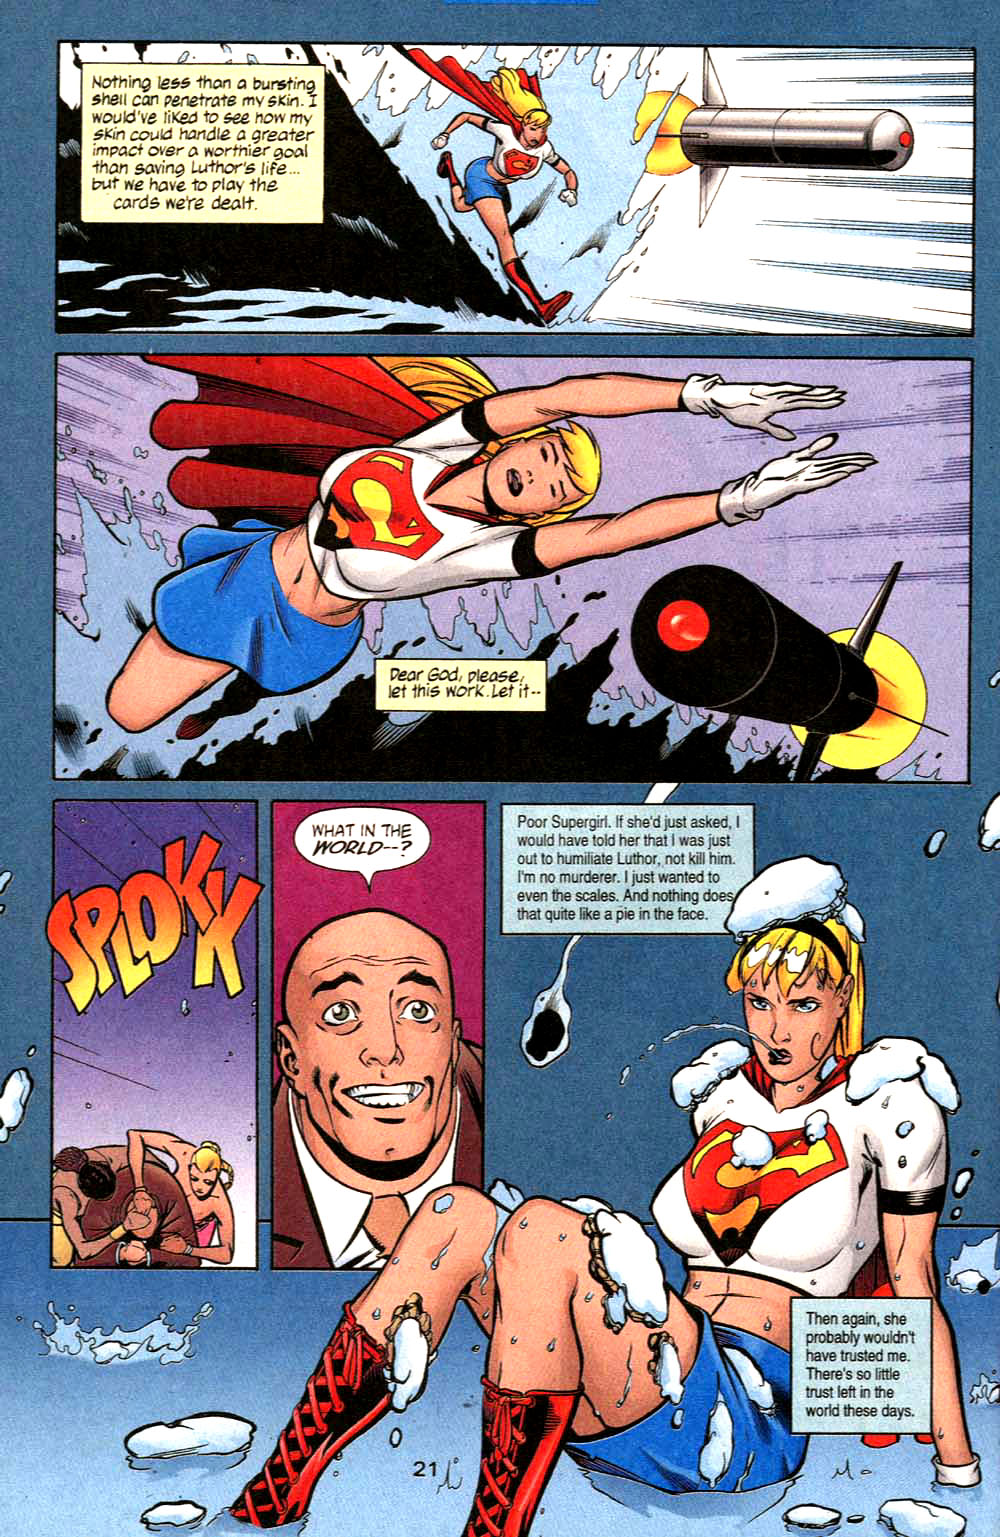 Supergirl (1996) 55 Page 21